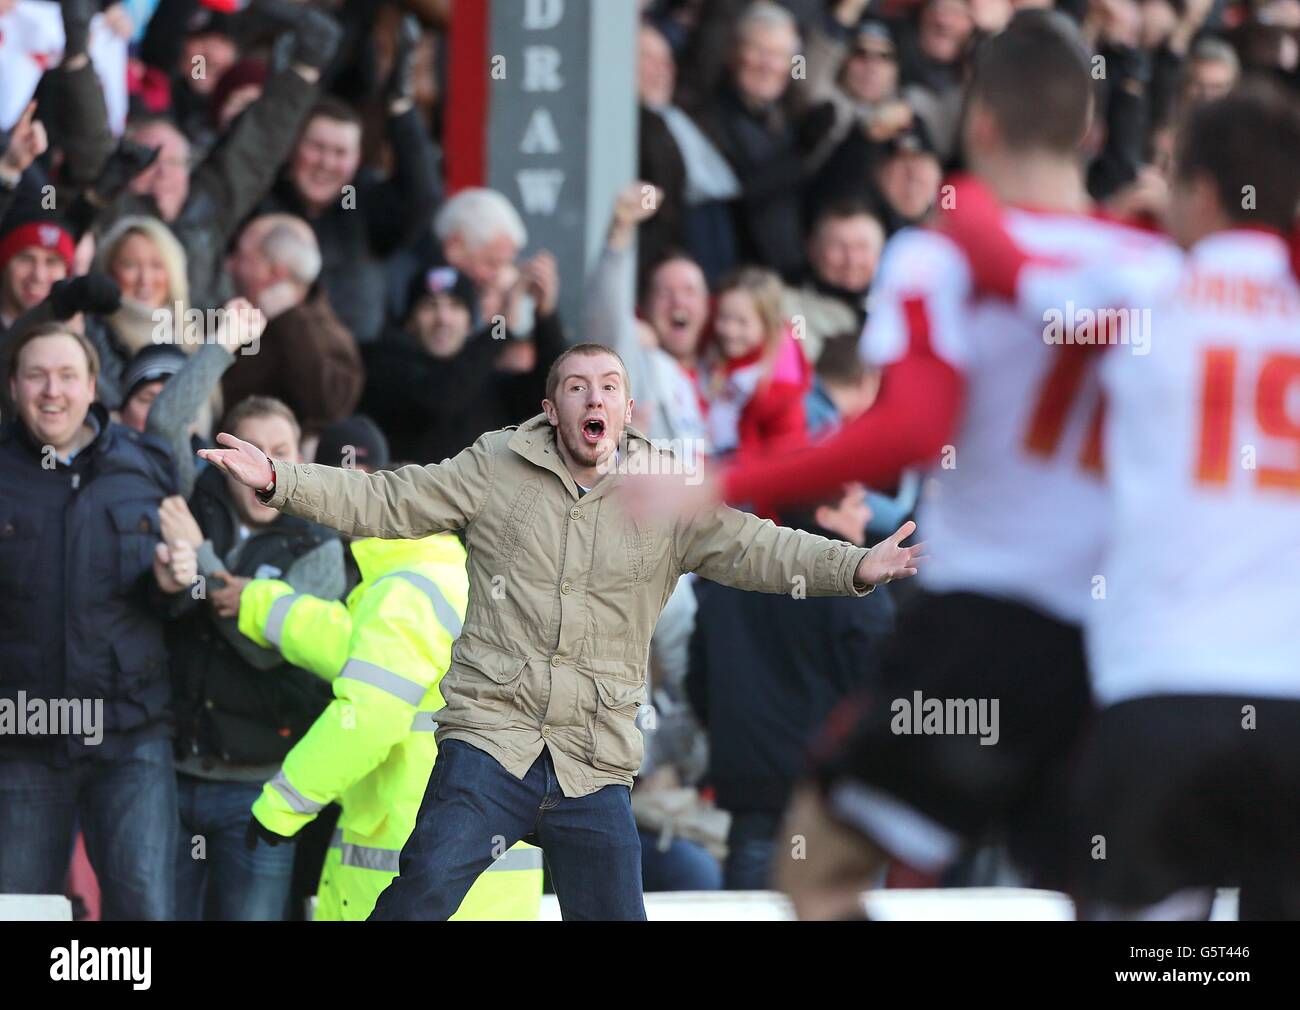 A fan can't hide his delight as Brentford's Marcello Trotta celebrates scoring their first goal of the game Stock Photo